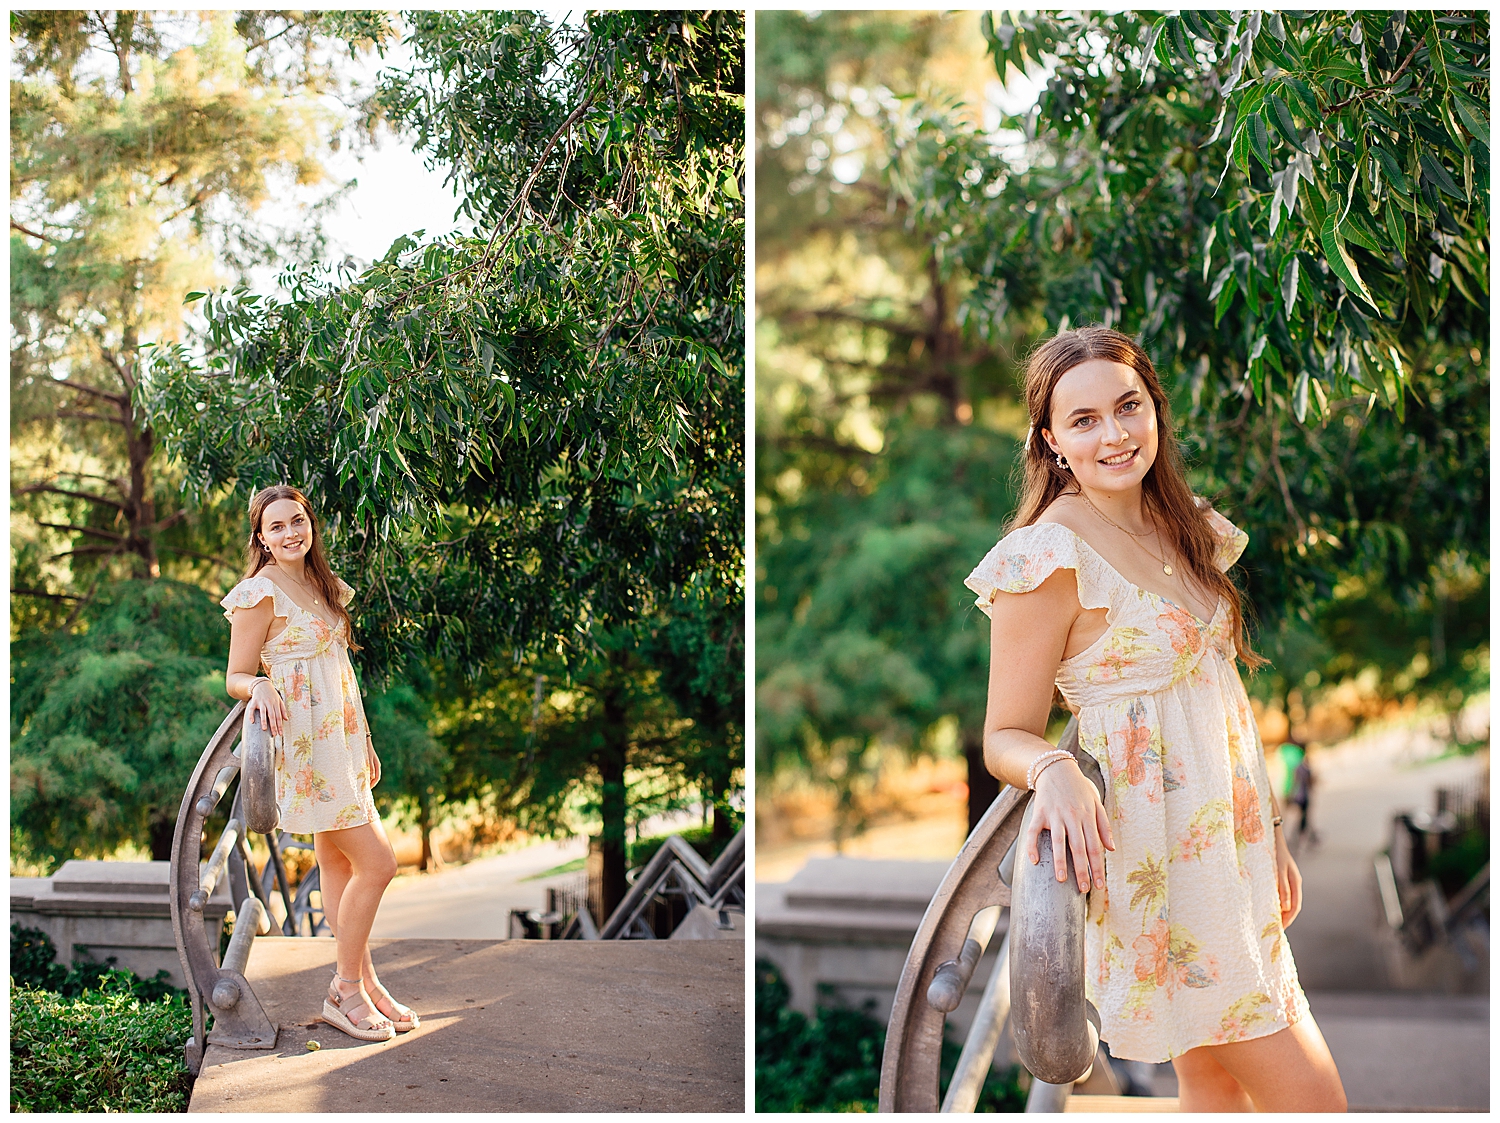 Houston outdoor senior photos at Sabine park with girl in yellow floral dress standing